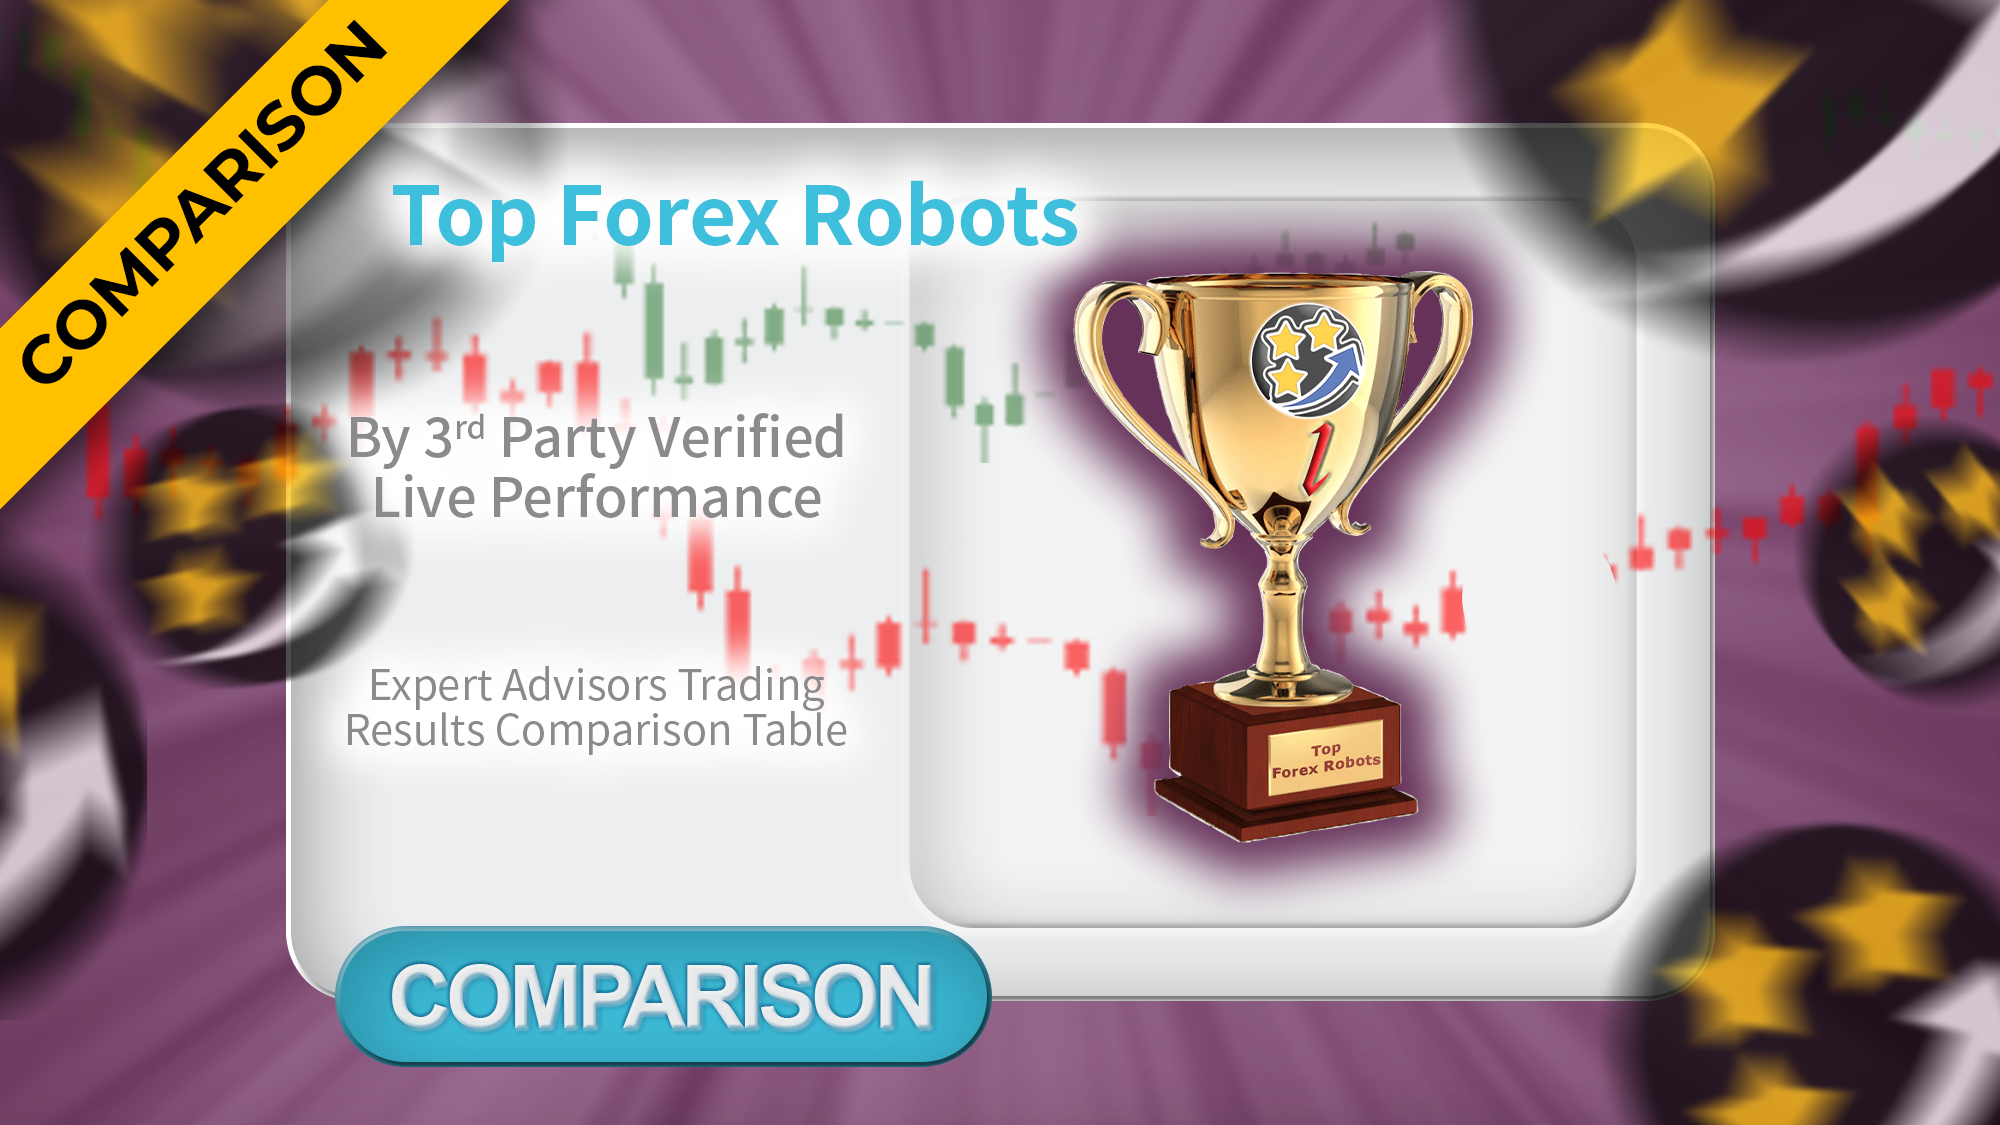 Top Rated Forex Robots